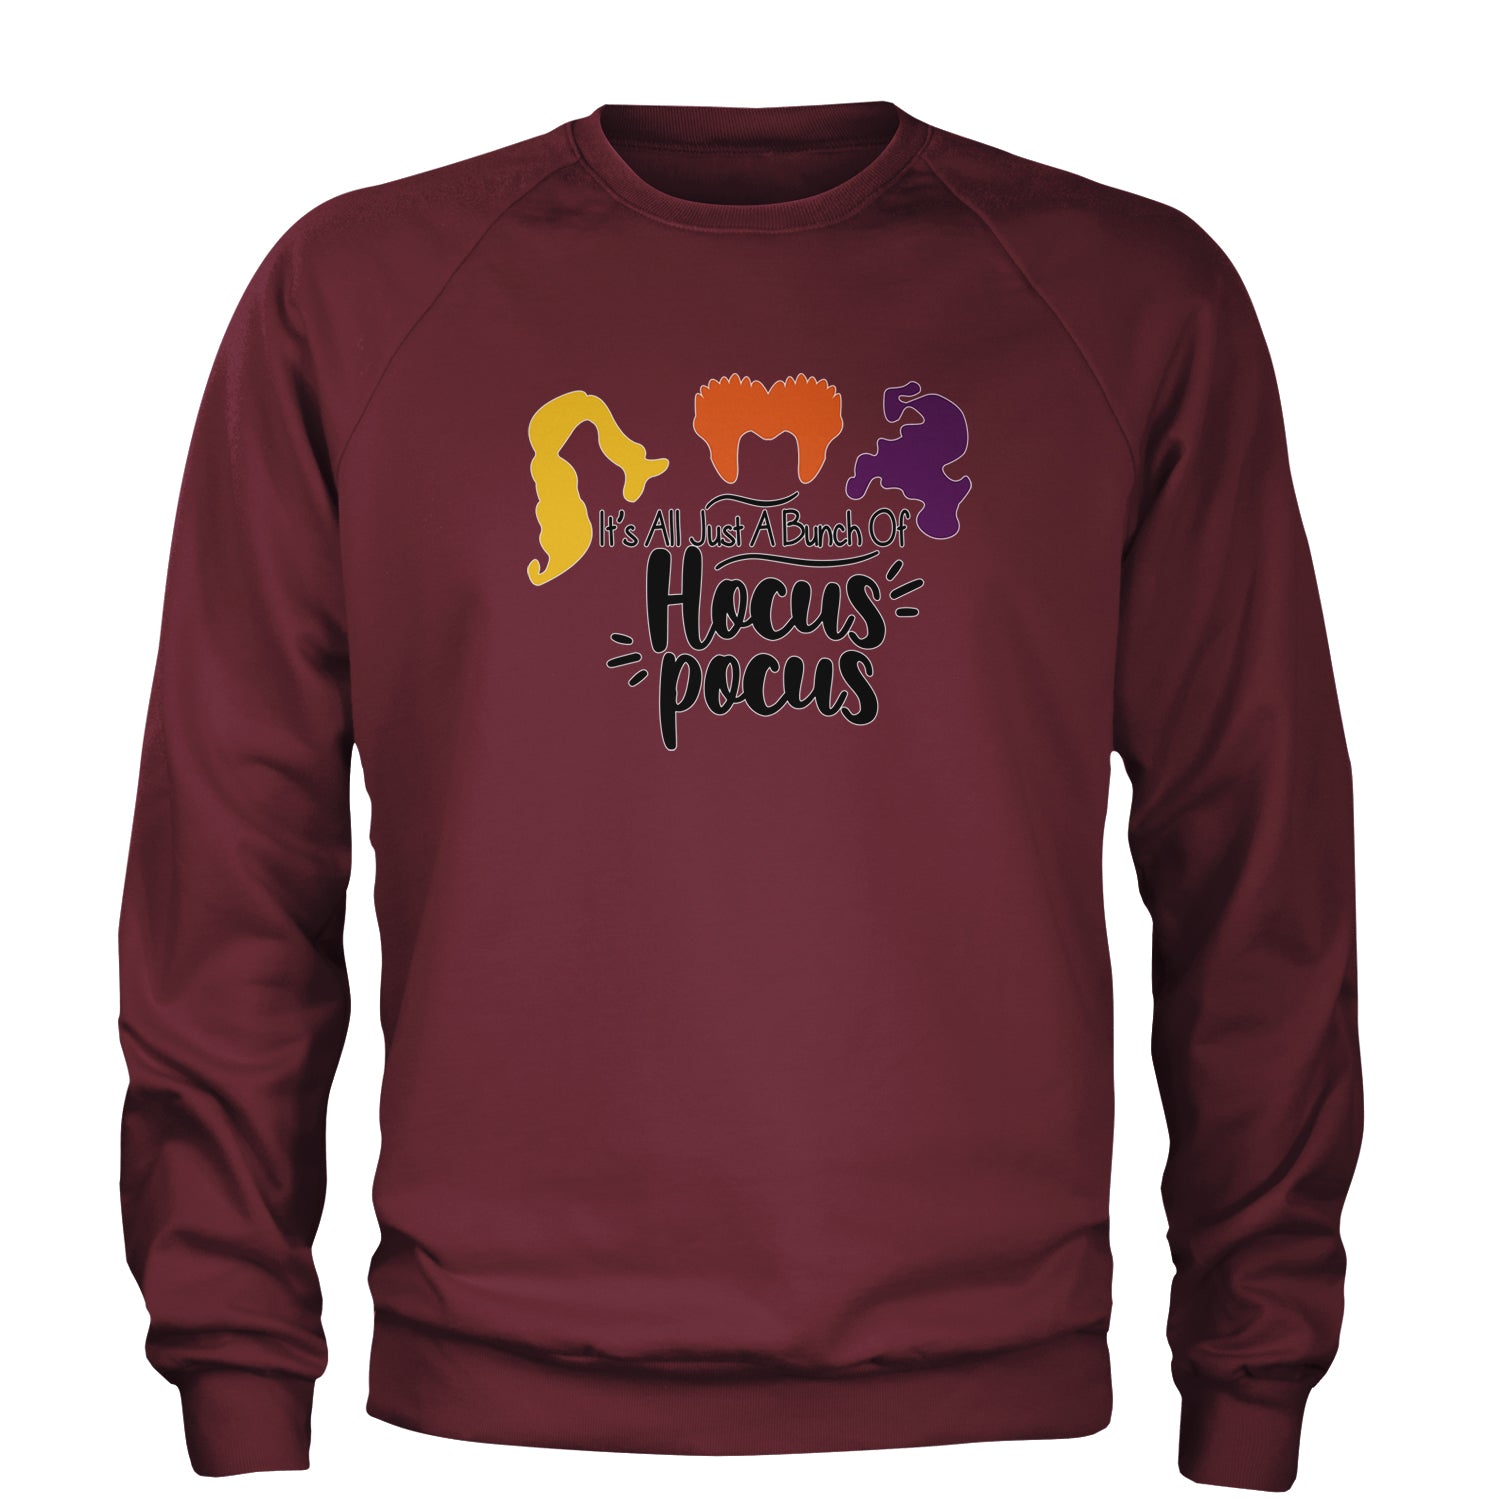 It's Just A Bunch Of Hocus Pocus Adult Crewneck Sweatshirt descendants, enchanted, eve, hallows, hocus, or, pocus, sanderson, sisters, treat, trick, witches by Expression Tees